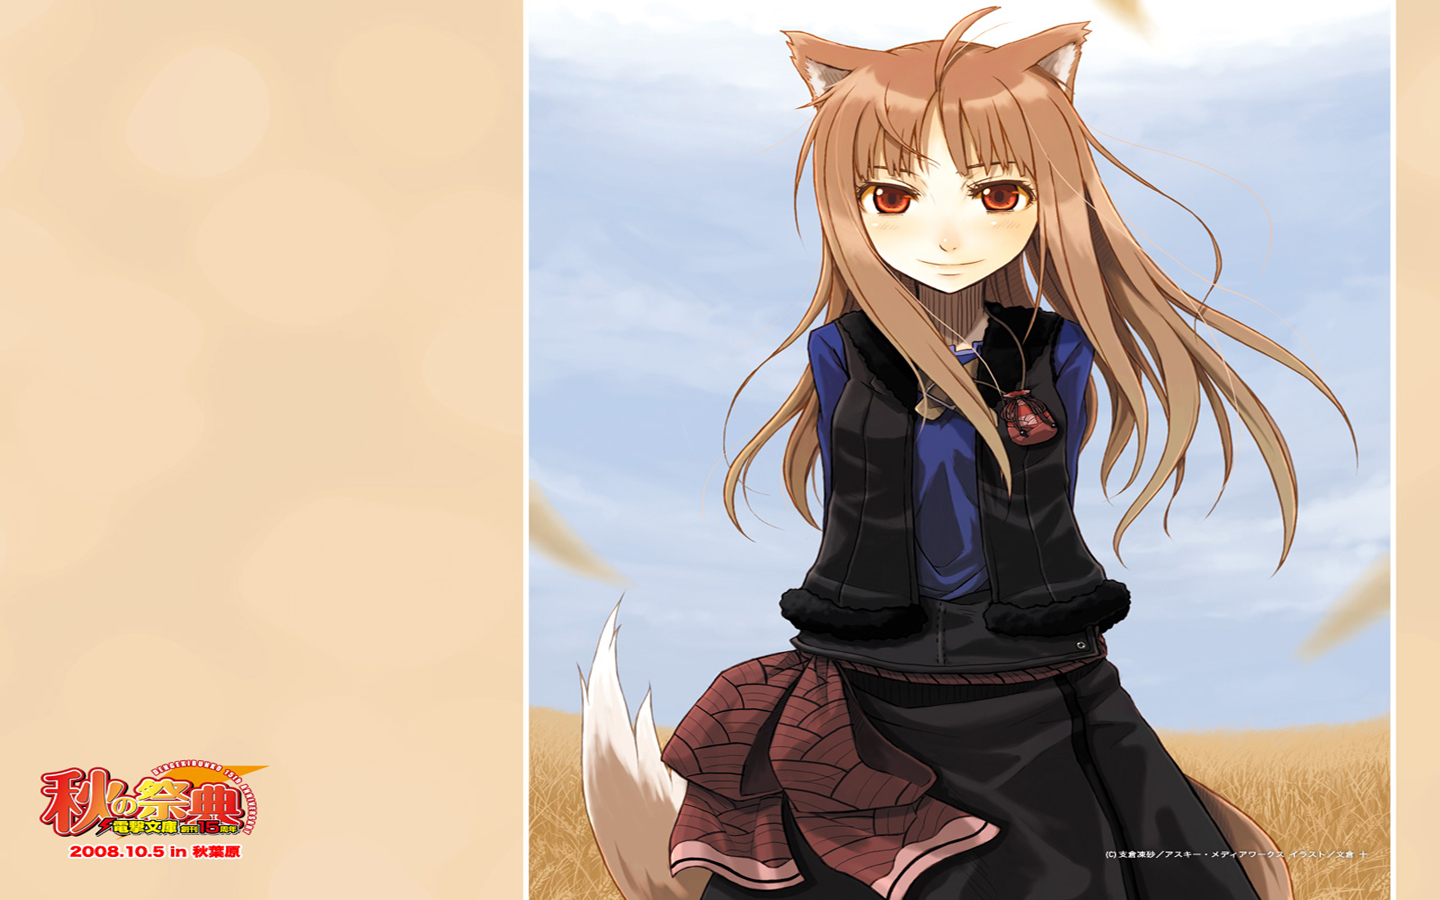 The Other Anime Wallpaper Titled Spice And Wolf